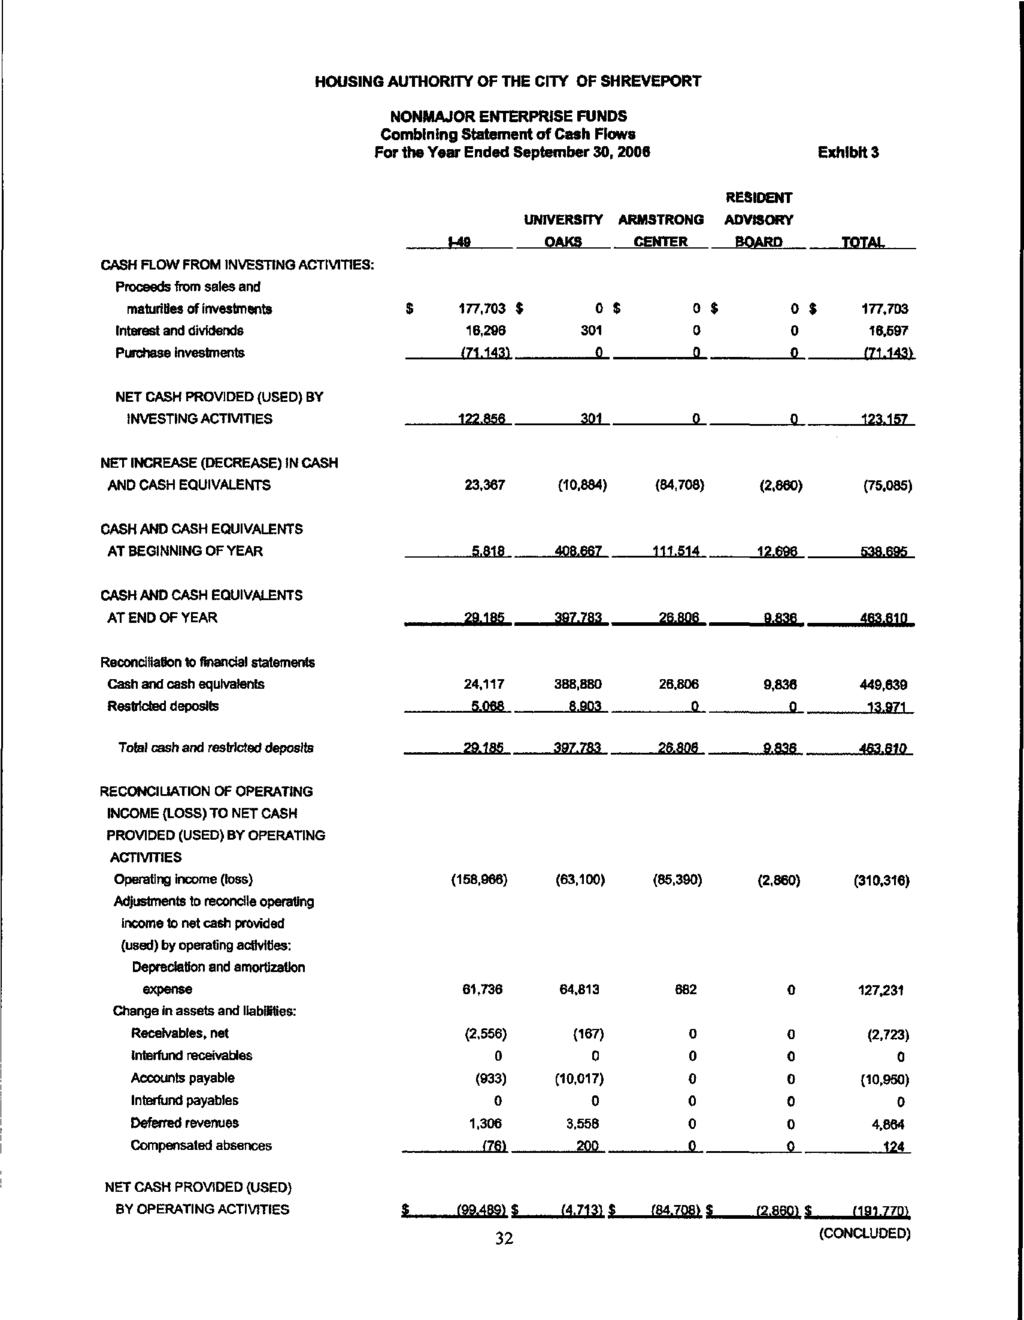 HOUSING AUTHORITY OF THE CITY OFSHREVEPORT NONMAJOR ENTERPRISE FUNDS Combining Statement of Cash Flows For the Year Ended September 3,26 Exhibits CASH FLOW FROM INVESTING ACTIVITIES: Proceeds from